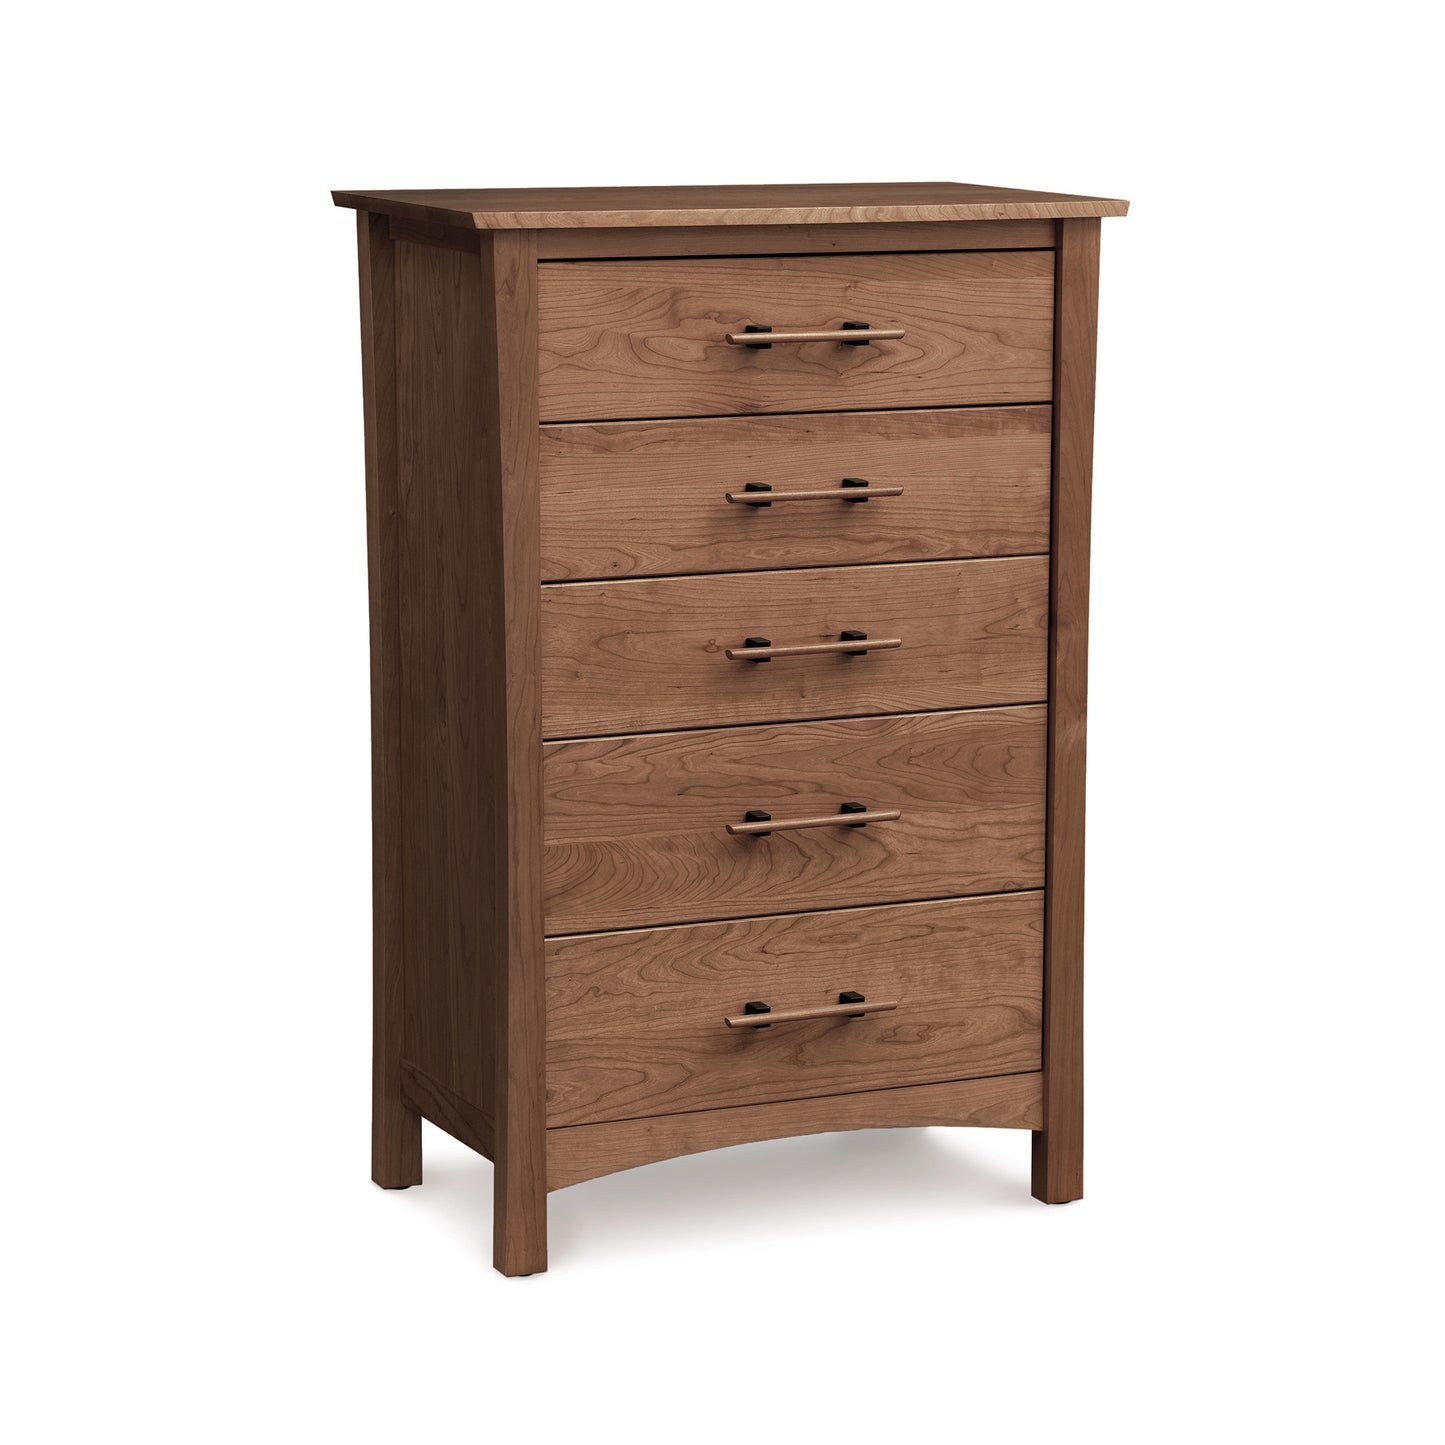 A luxurious Monterey 5-Drawer Chest handmade from cherry wood, featuring four spacious drawers, by Copeland Furniture.